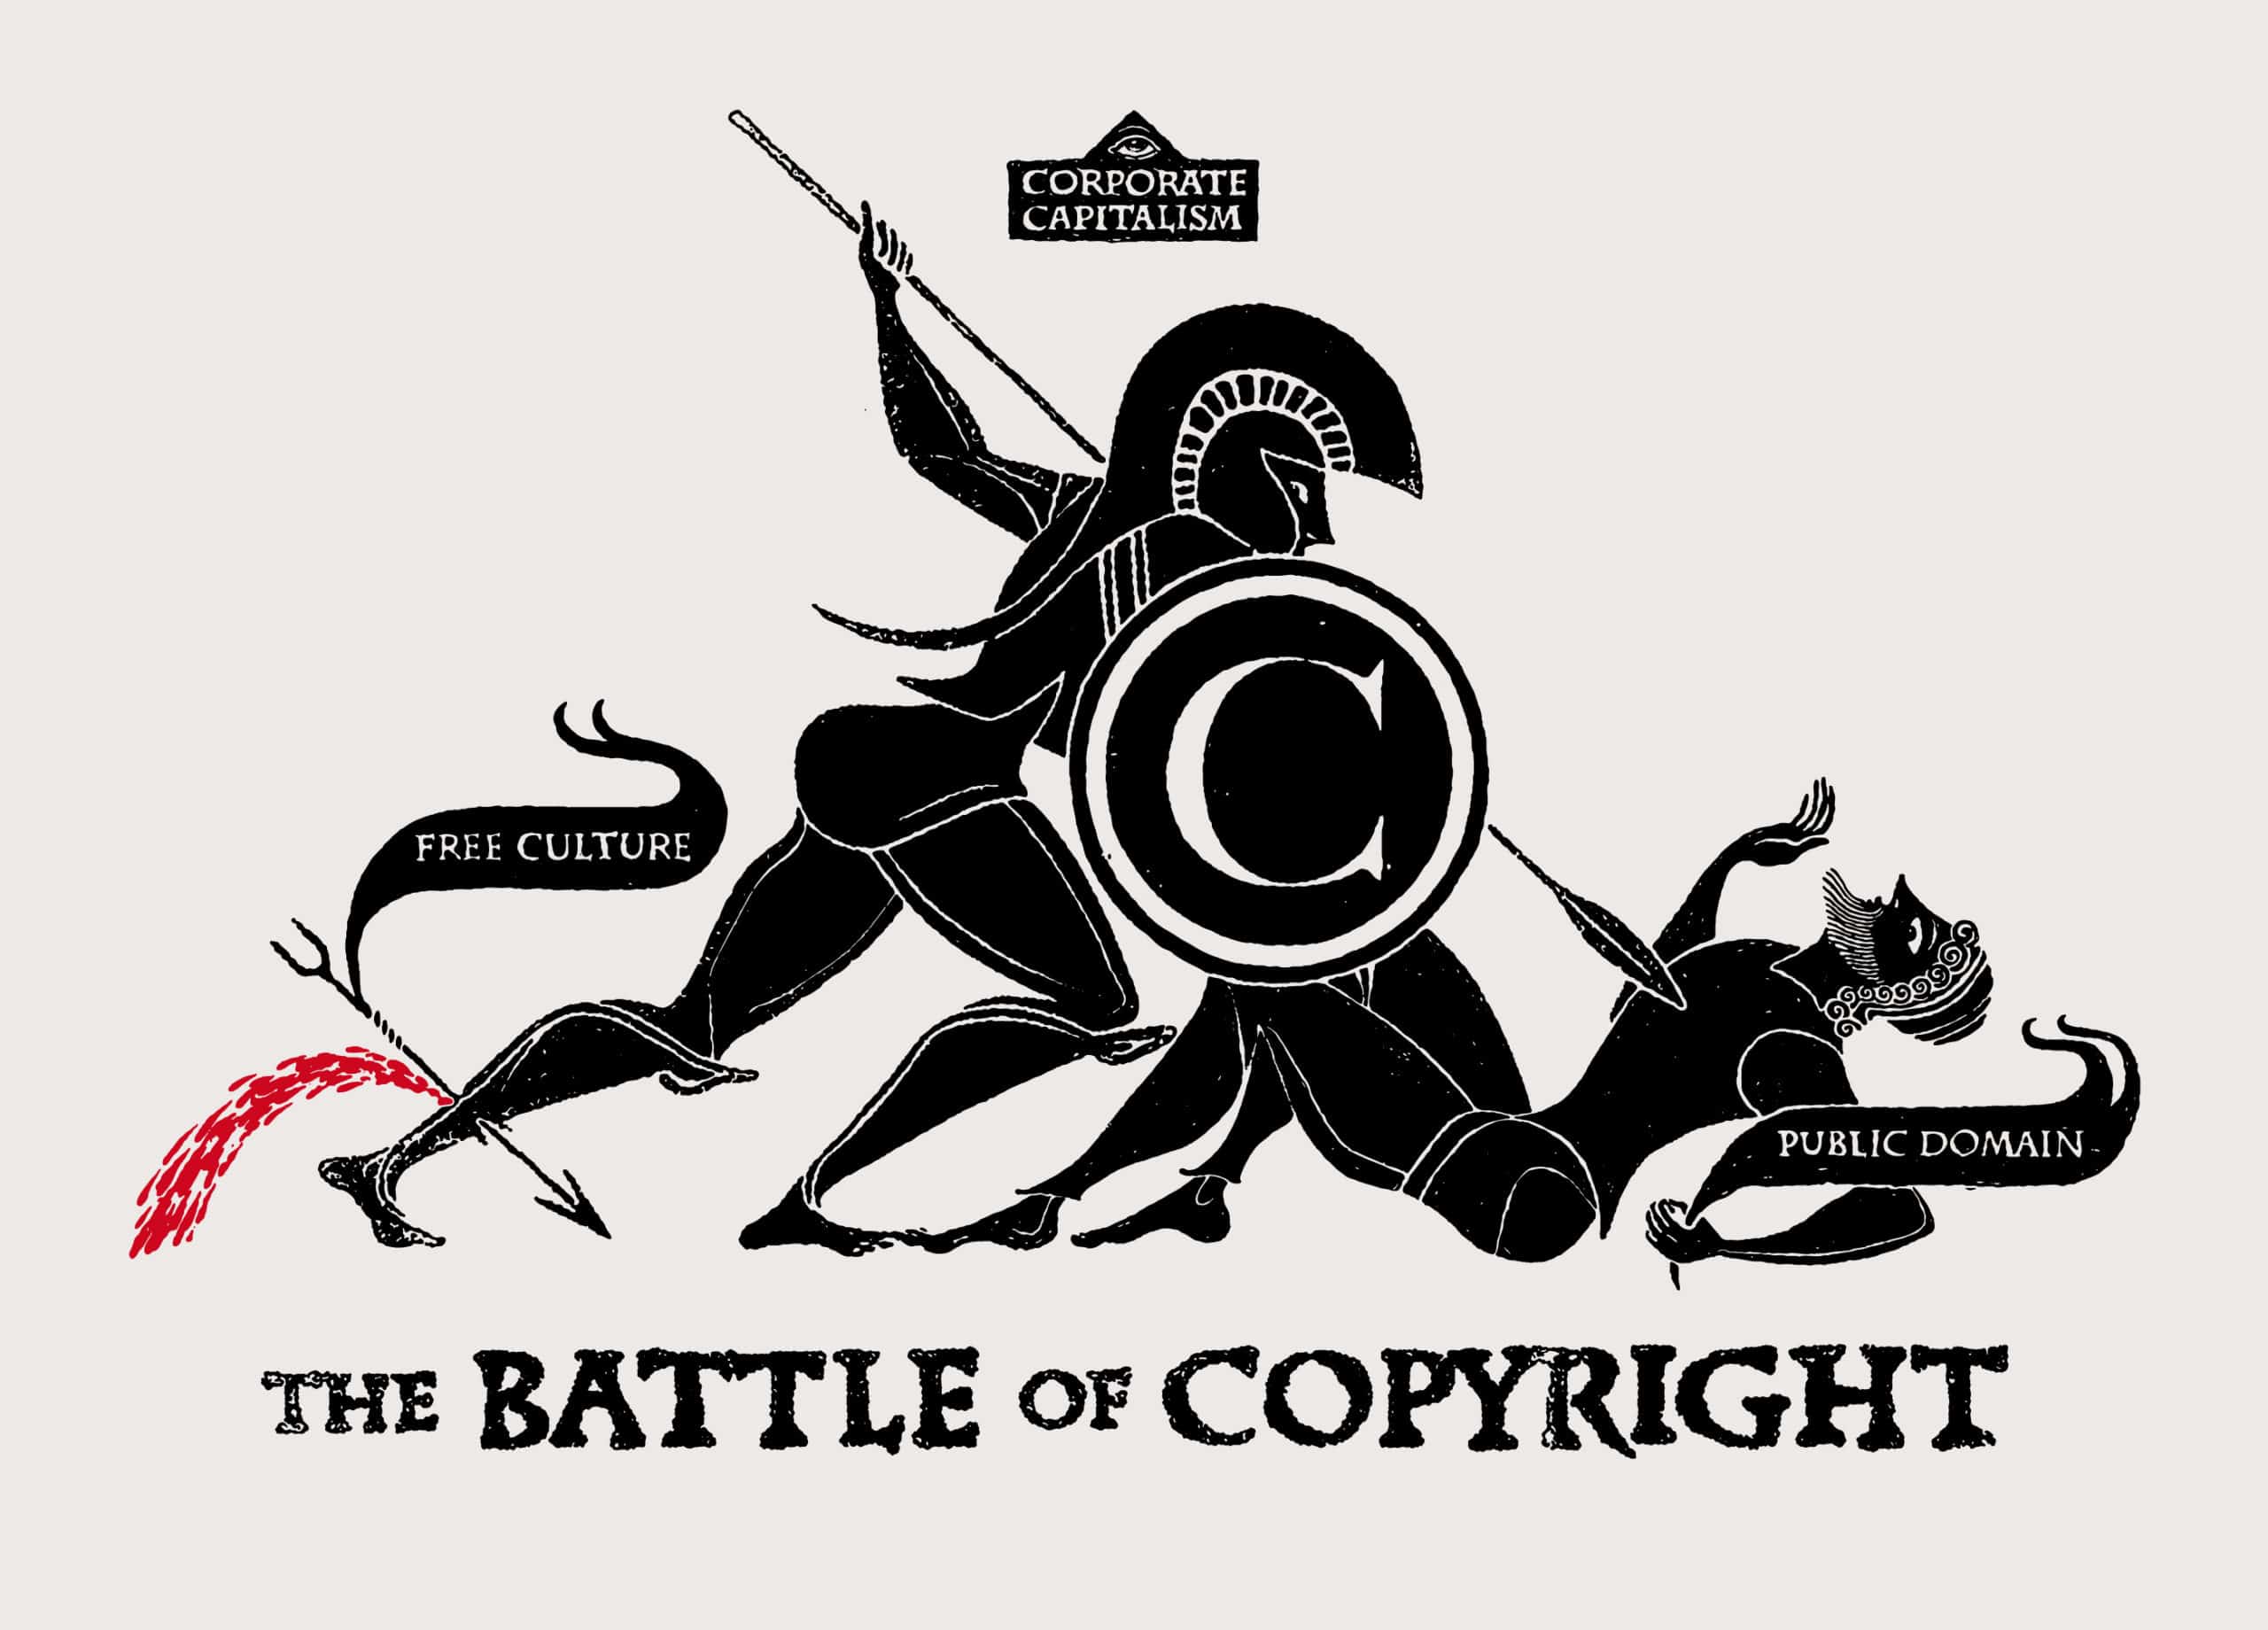 THE BATTLE OF COPYRIGHT scaled